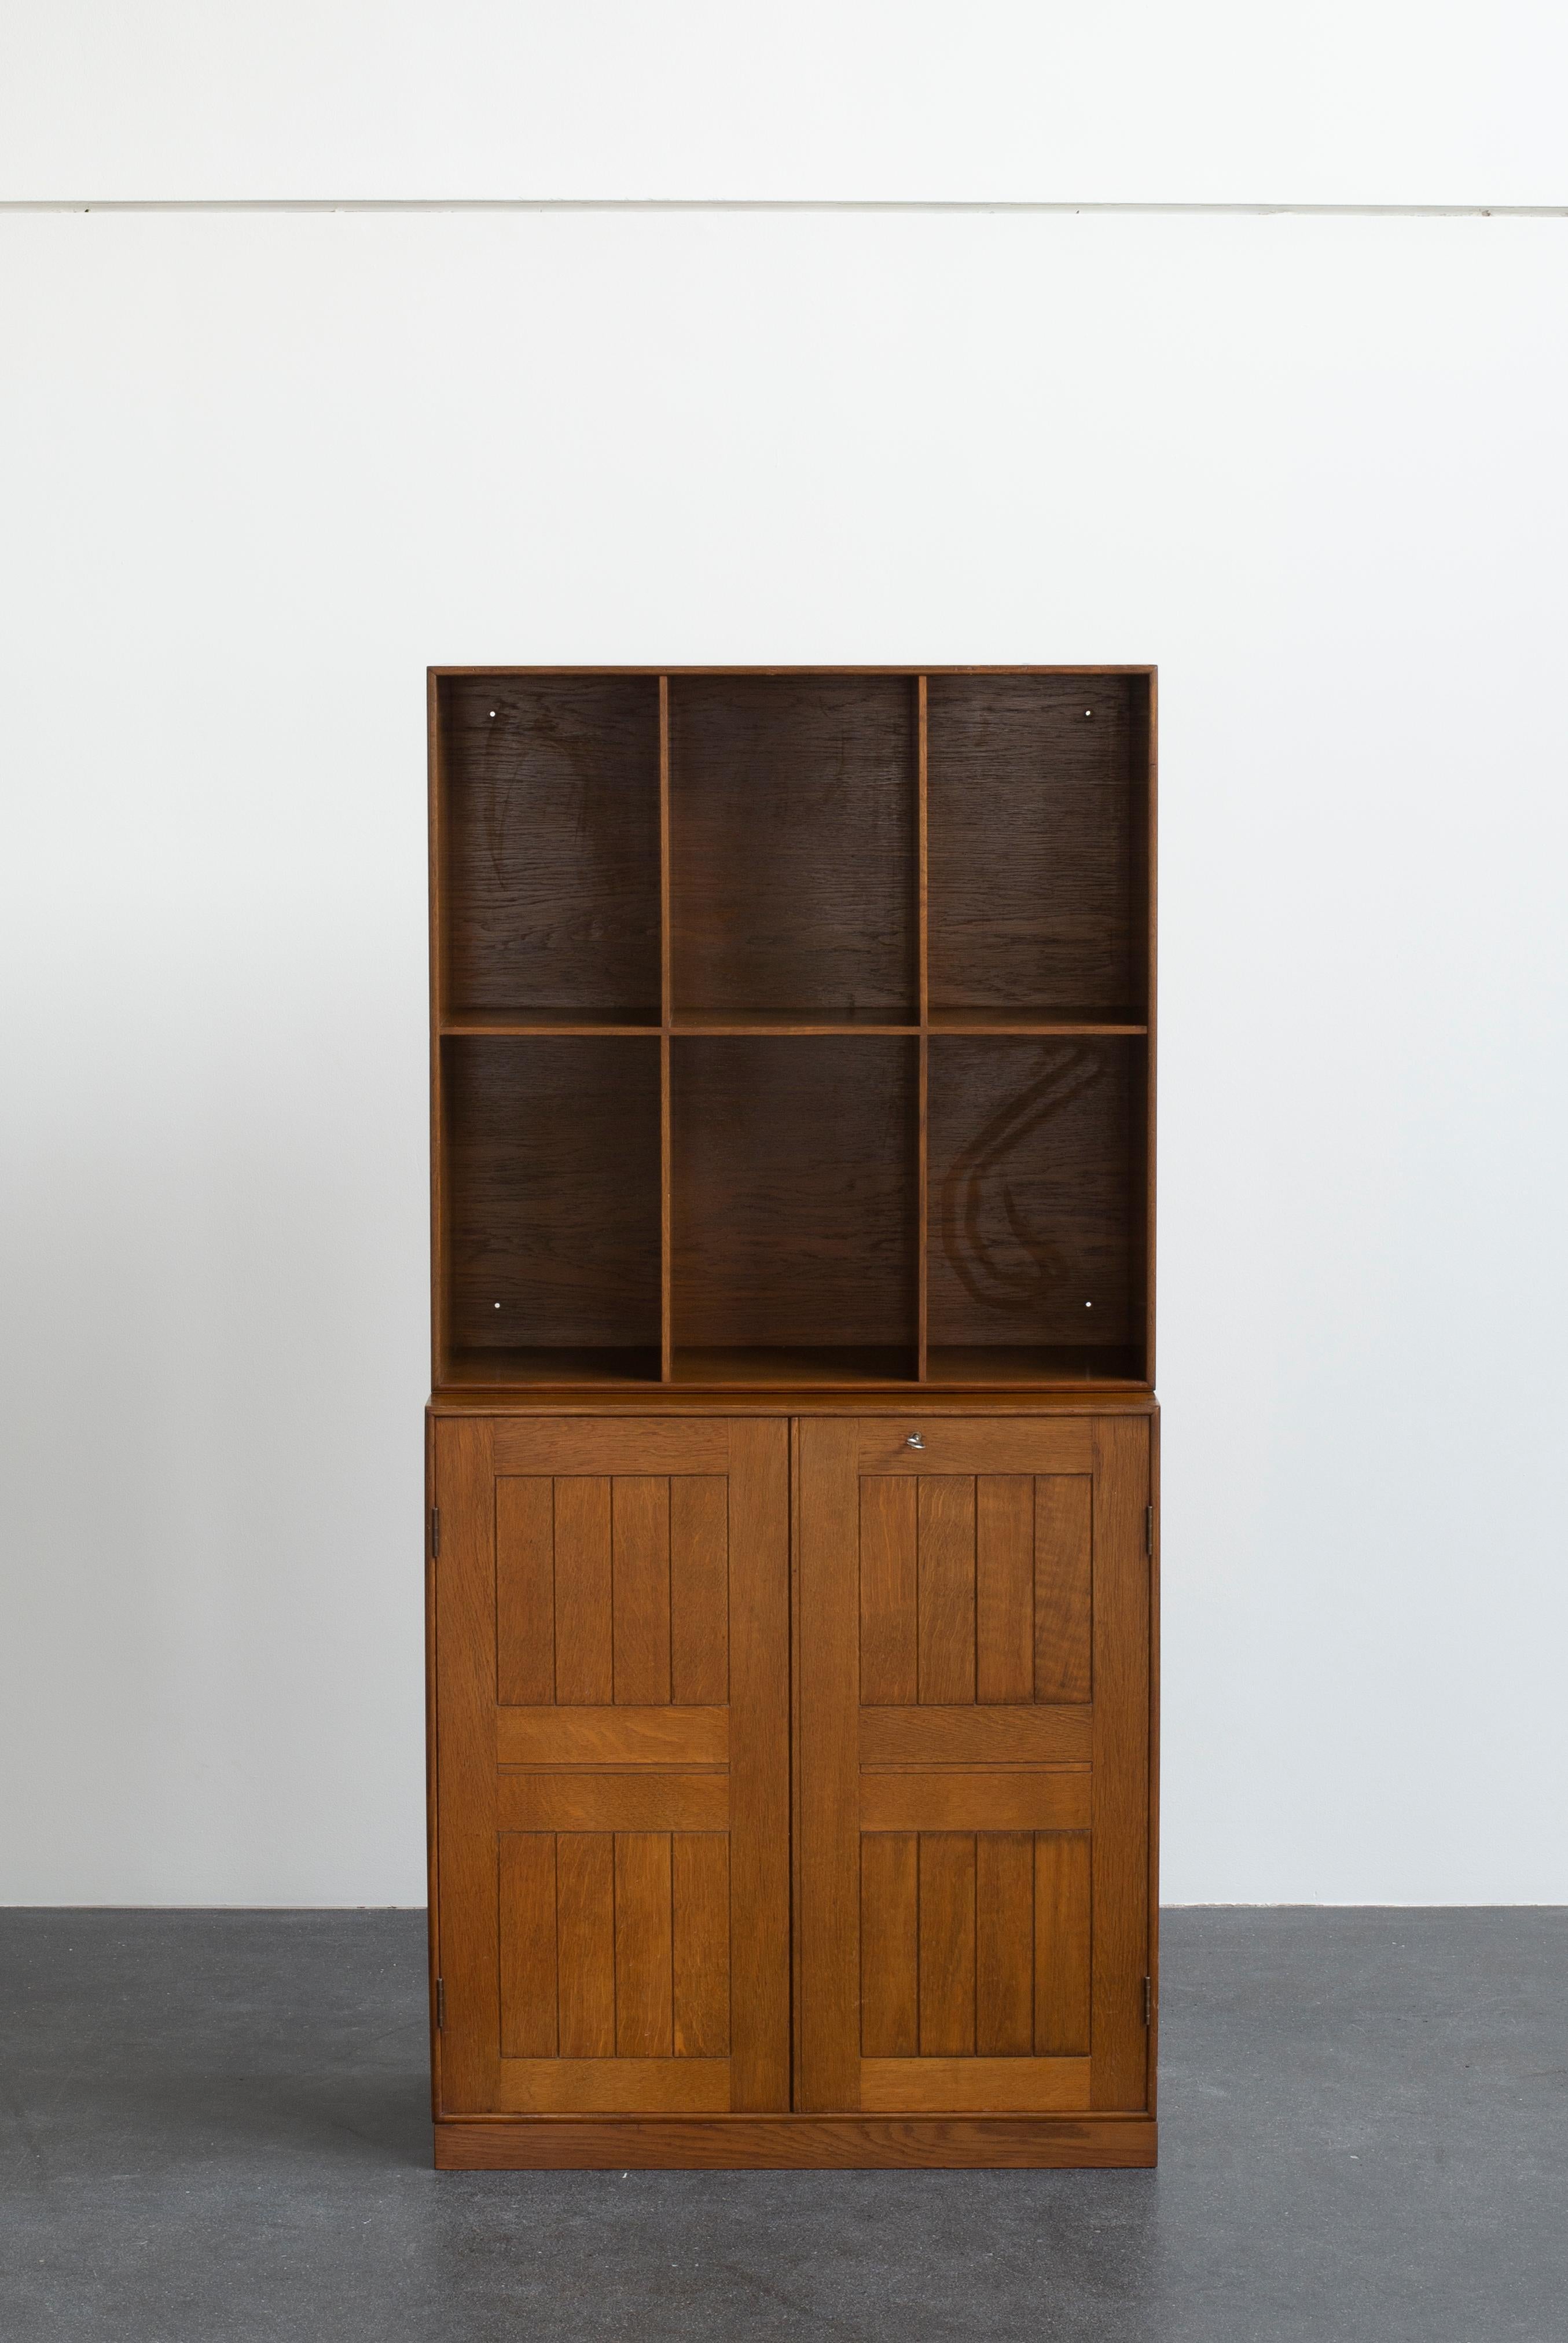 Mogens Koch cabinet and a bookcase in stained oak. Executed by Rud. Rasmussen.

Reverse with paper labels ‘RUD. RASMUSSENS/SNEDKERIER/45 NØRREBROGADE/KØBENHAVN.